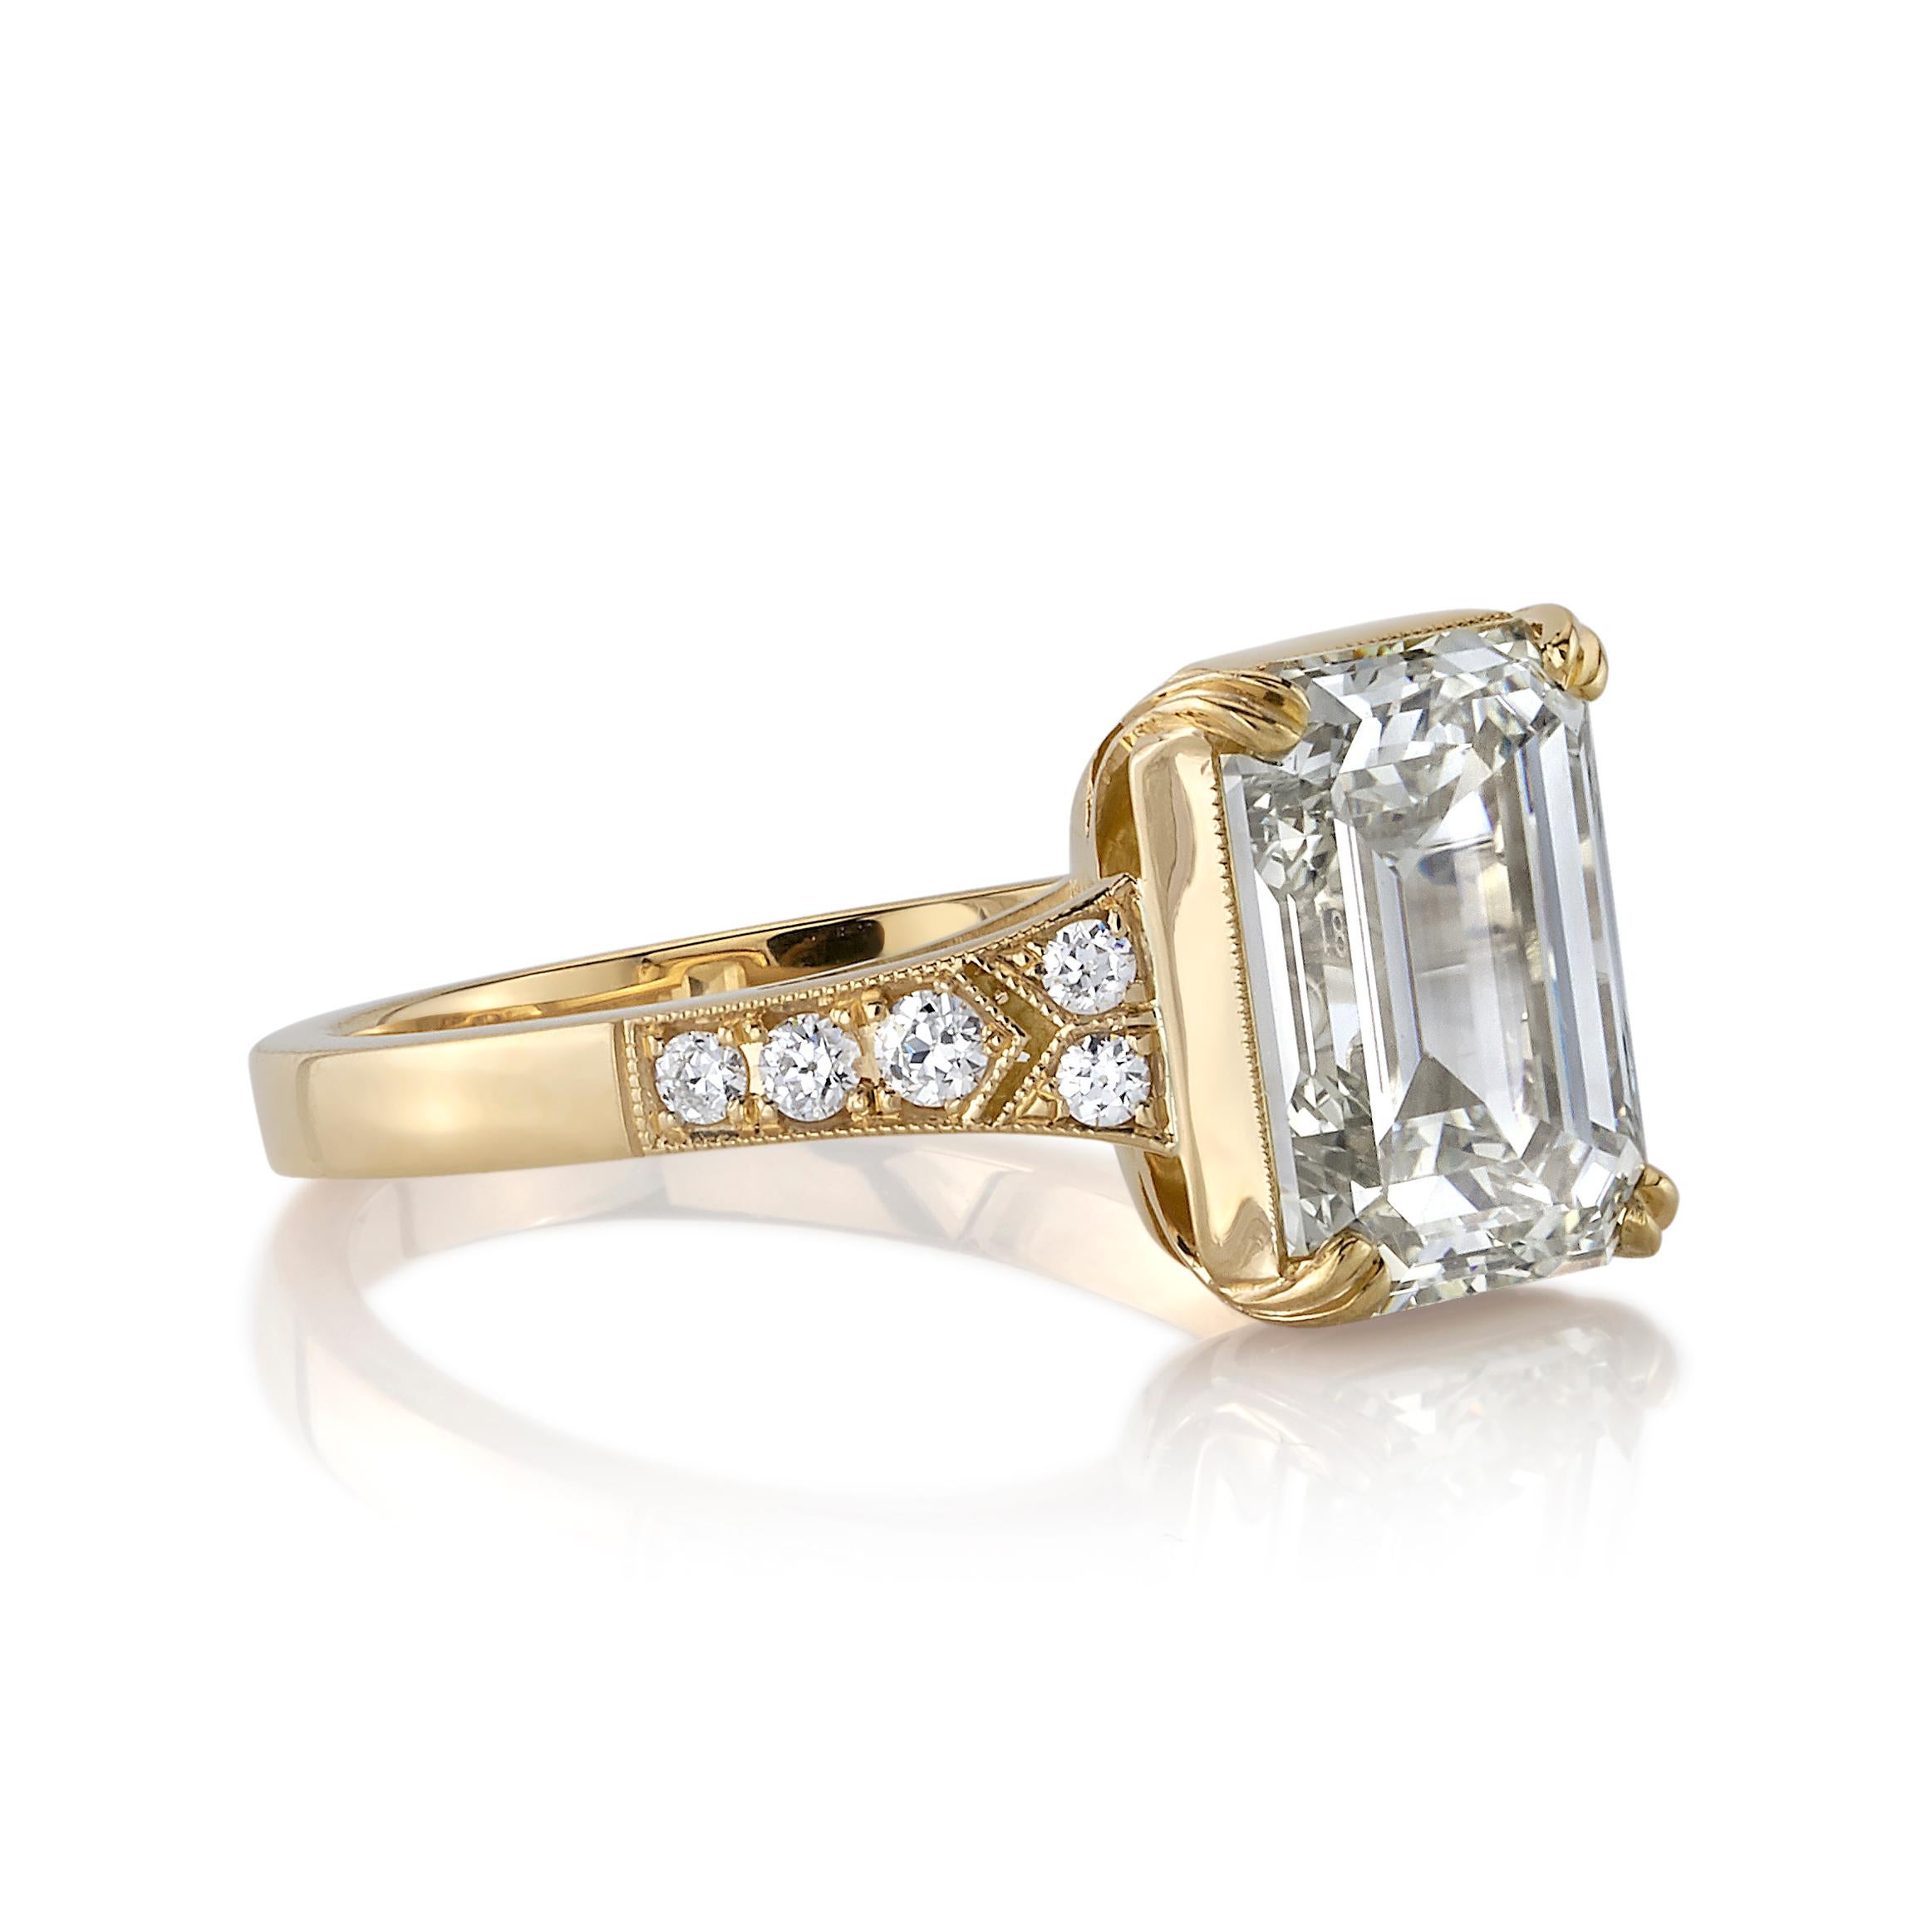 4.02ctw ST/VS2 GIA certified vintage Emerald cut diamond with 0.16ctw accent diamonds set in a handcrafted 18K yellow gold mounting.

Ring is currently a size 6 and can be sized to fit.